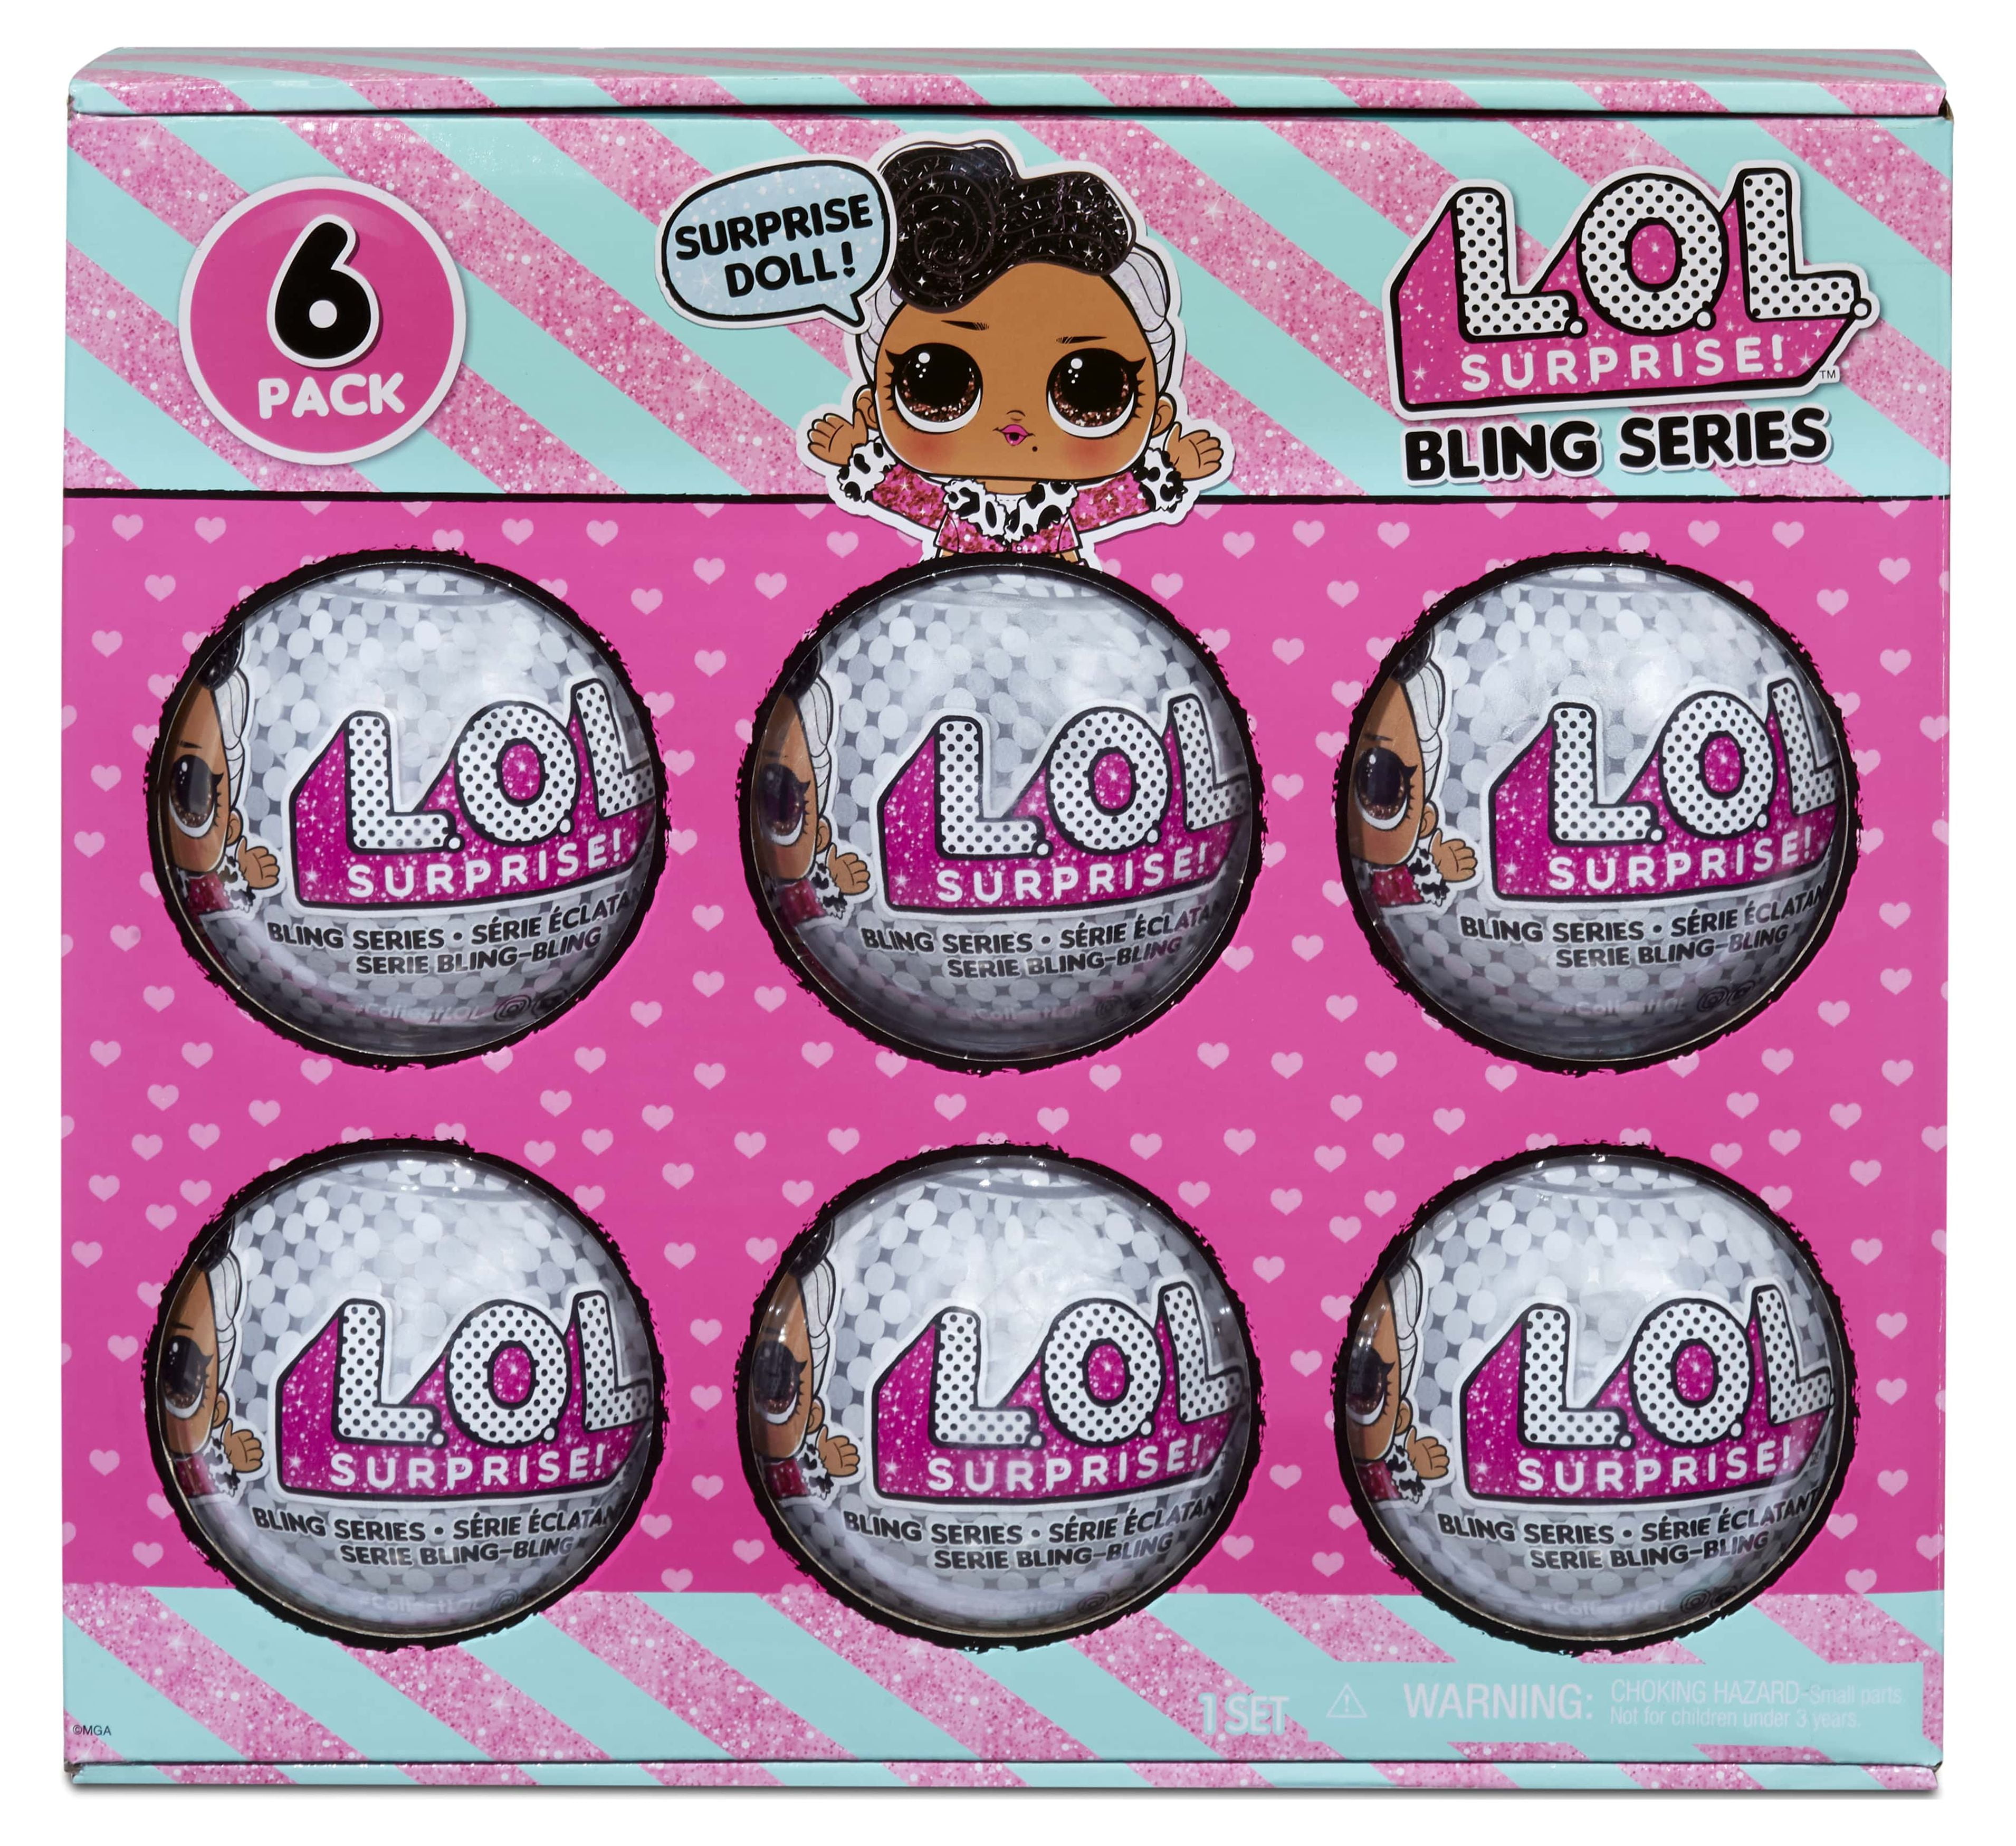 LOL Surprise Tots Ball Series 2, Great Gift for Kids Ages 4 5 6+